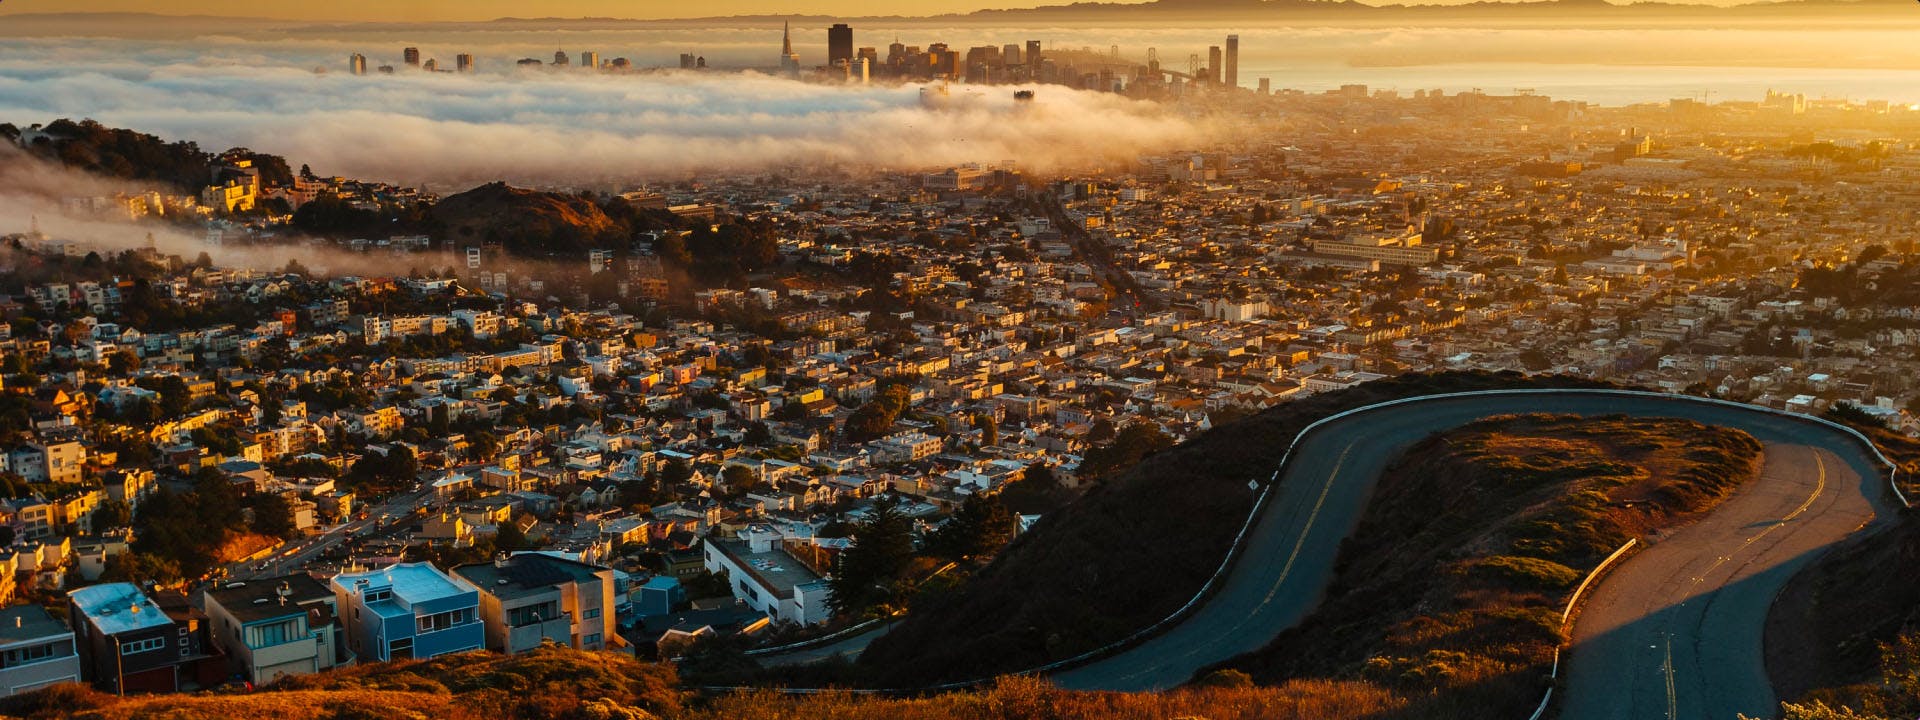 View of Silicon Valley from Twin Peaks, symbolizing the navigation required to reach goals within a complex technological system.